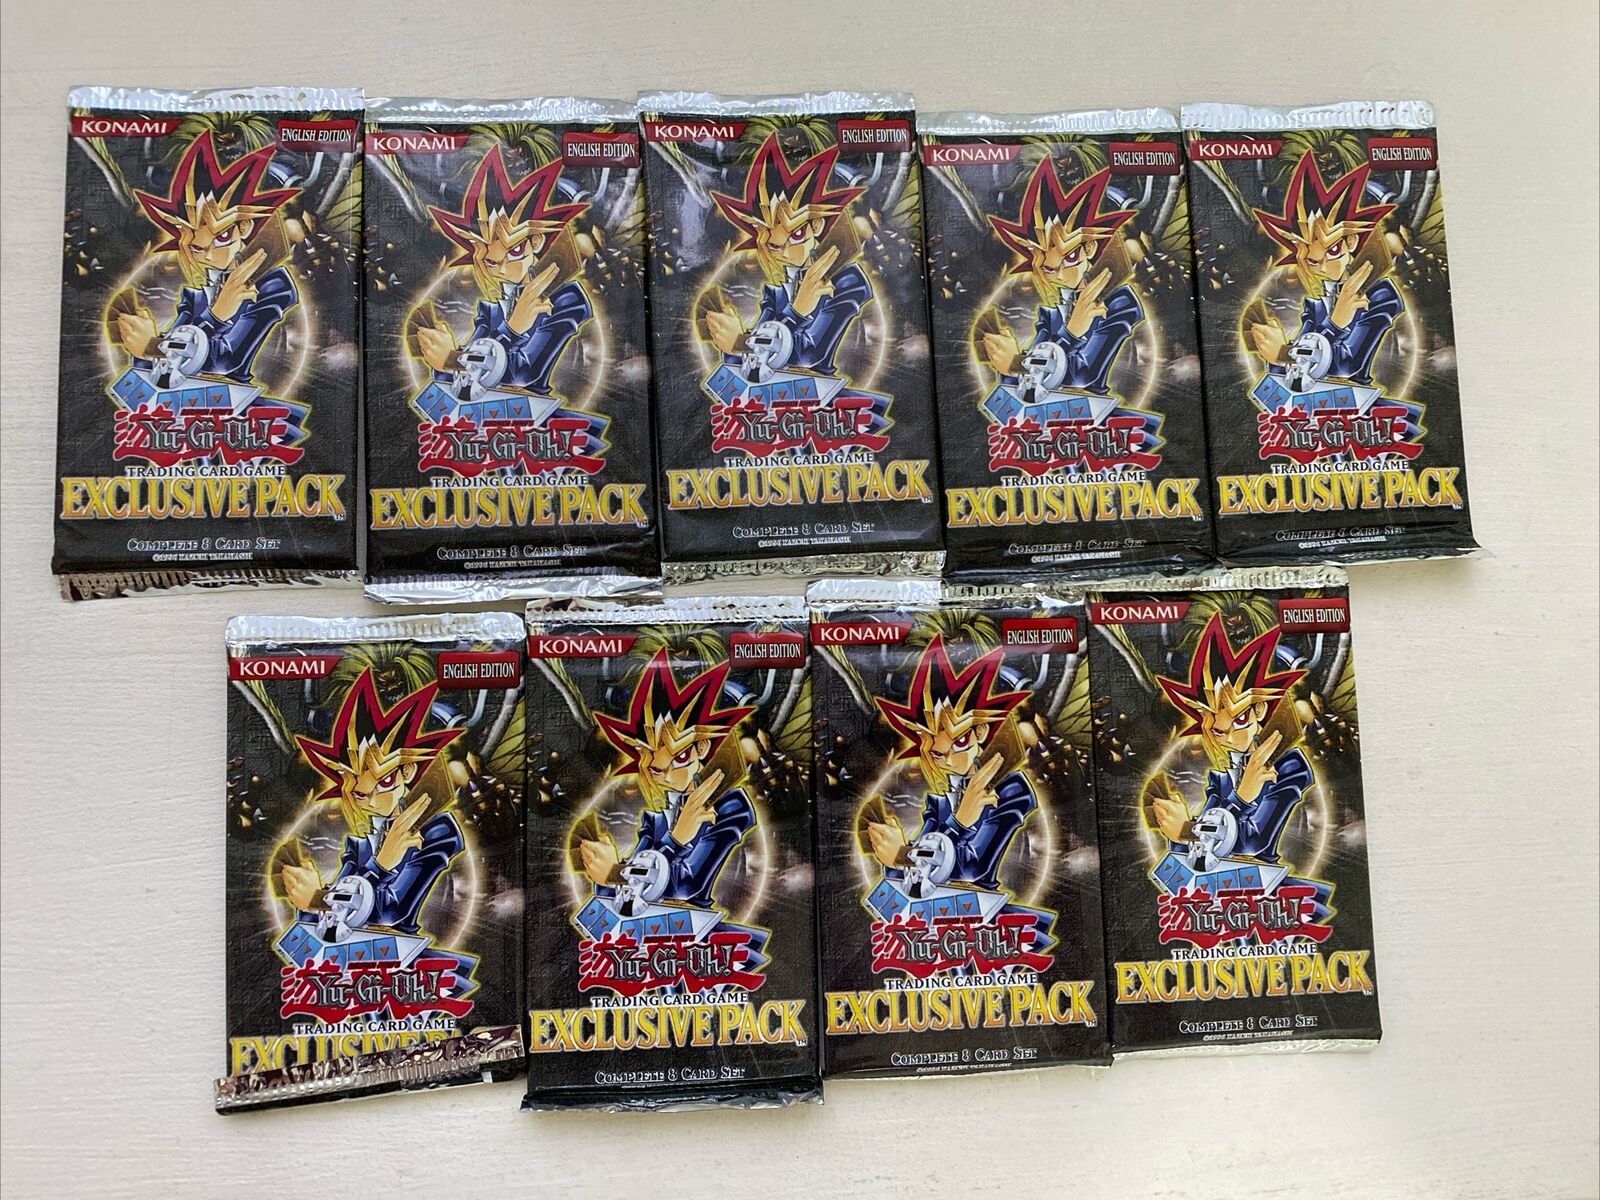 YuGiOh 2004 Exclusive Pack Vintage Booster Pack Sealed x9